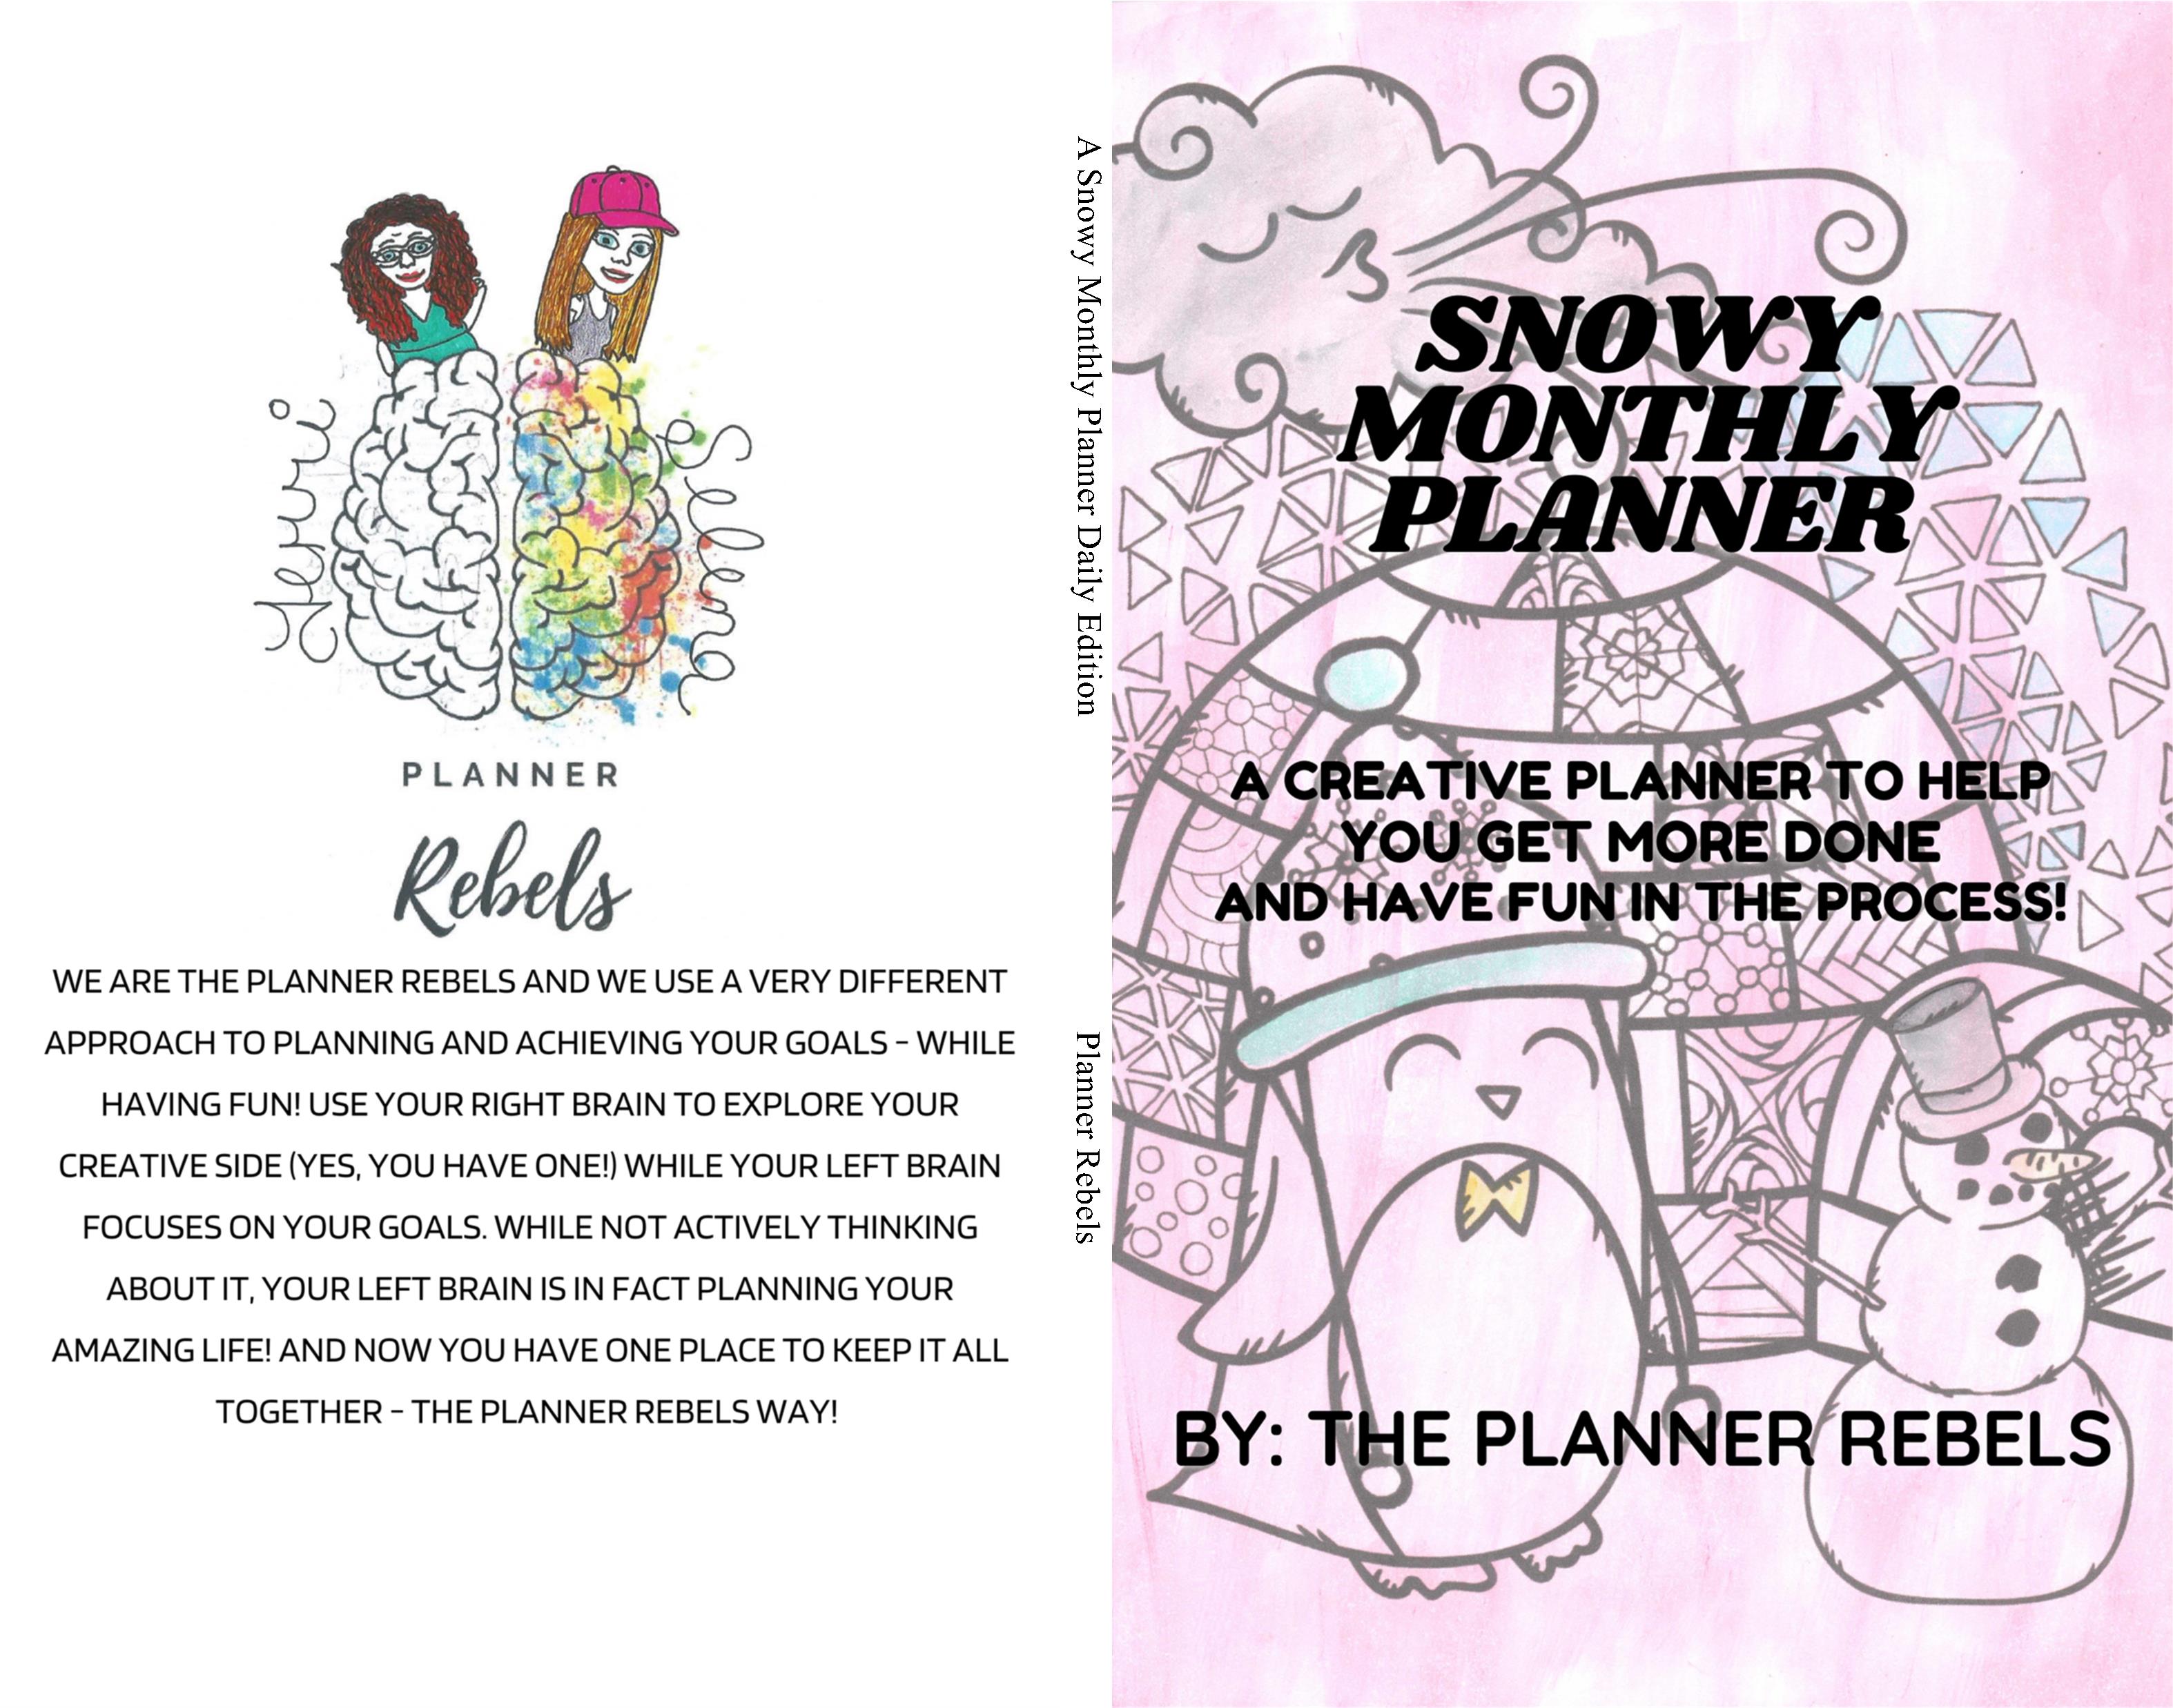 A Snowy Monthly Planner Daily Edition cover image